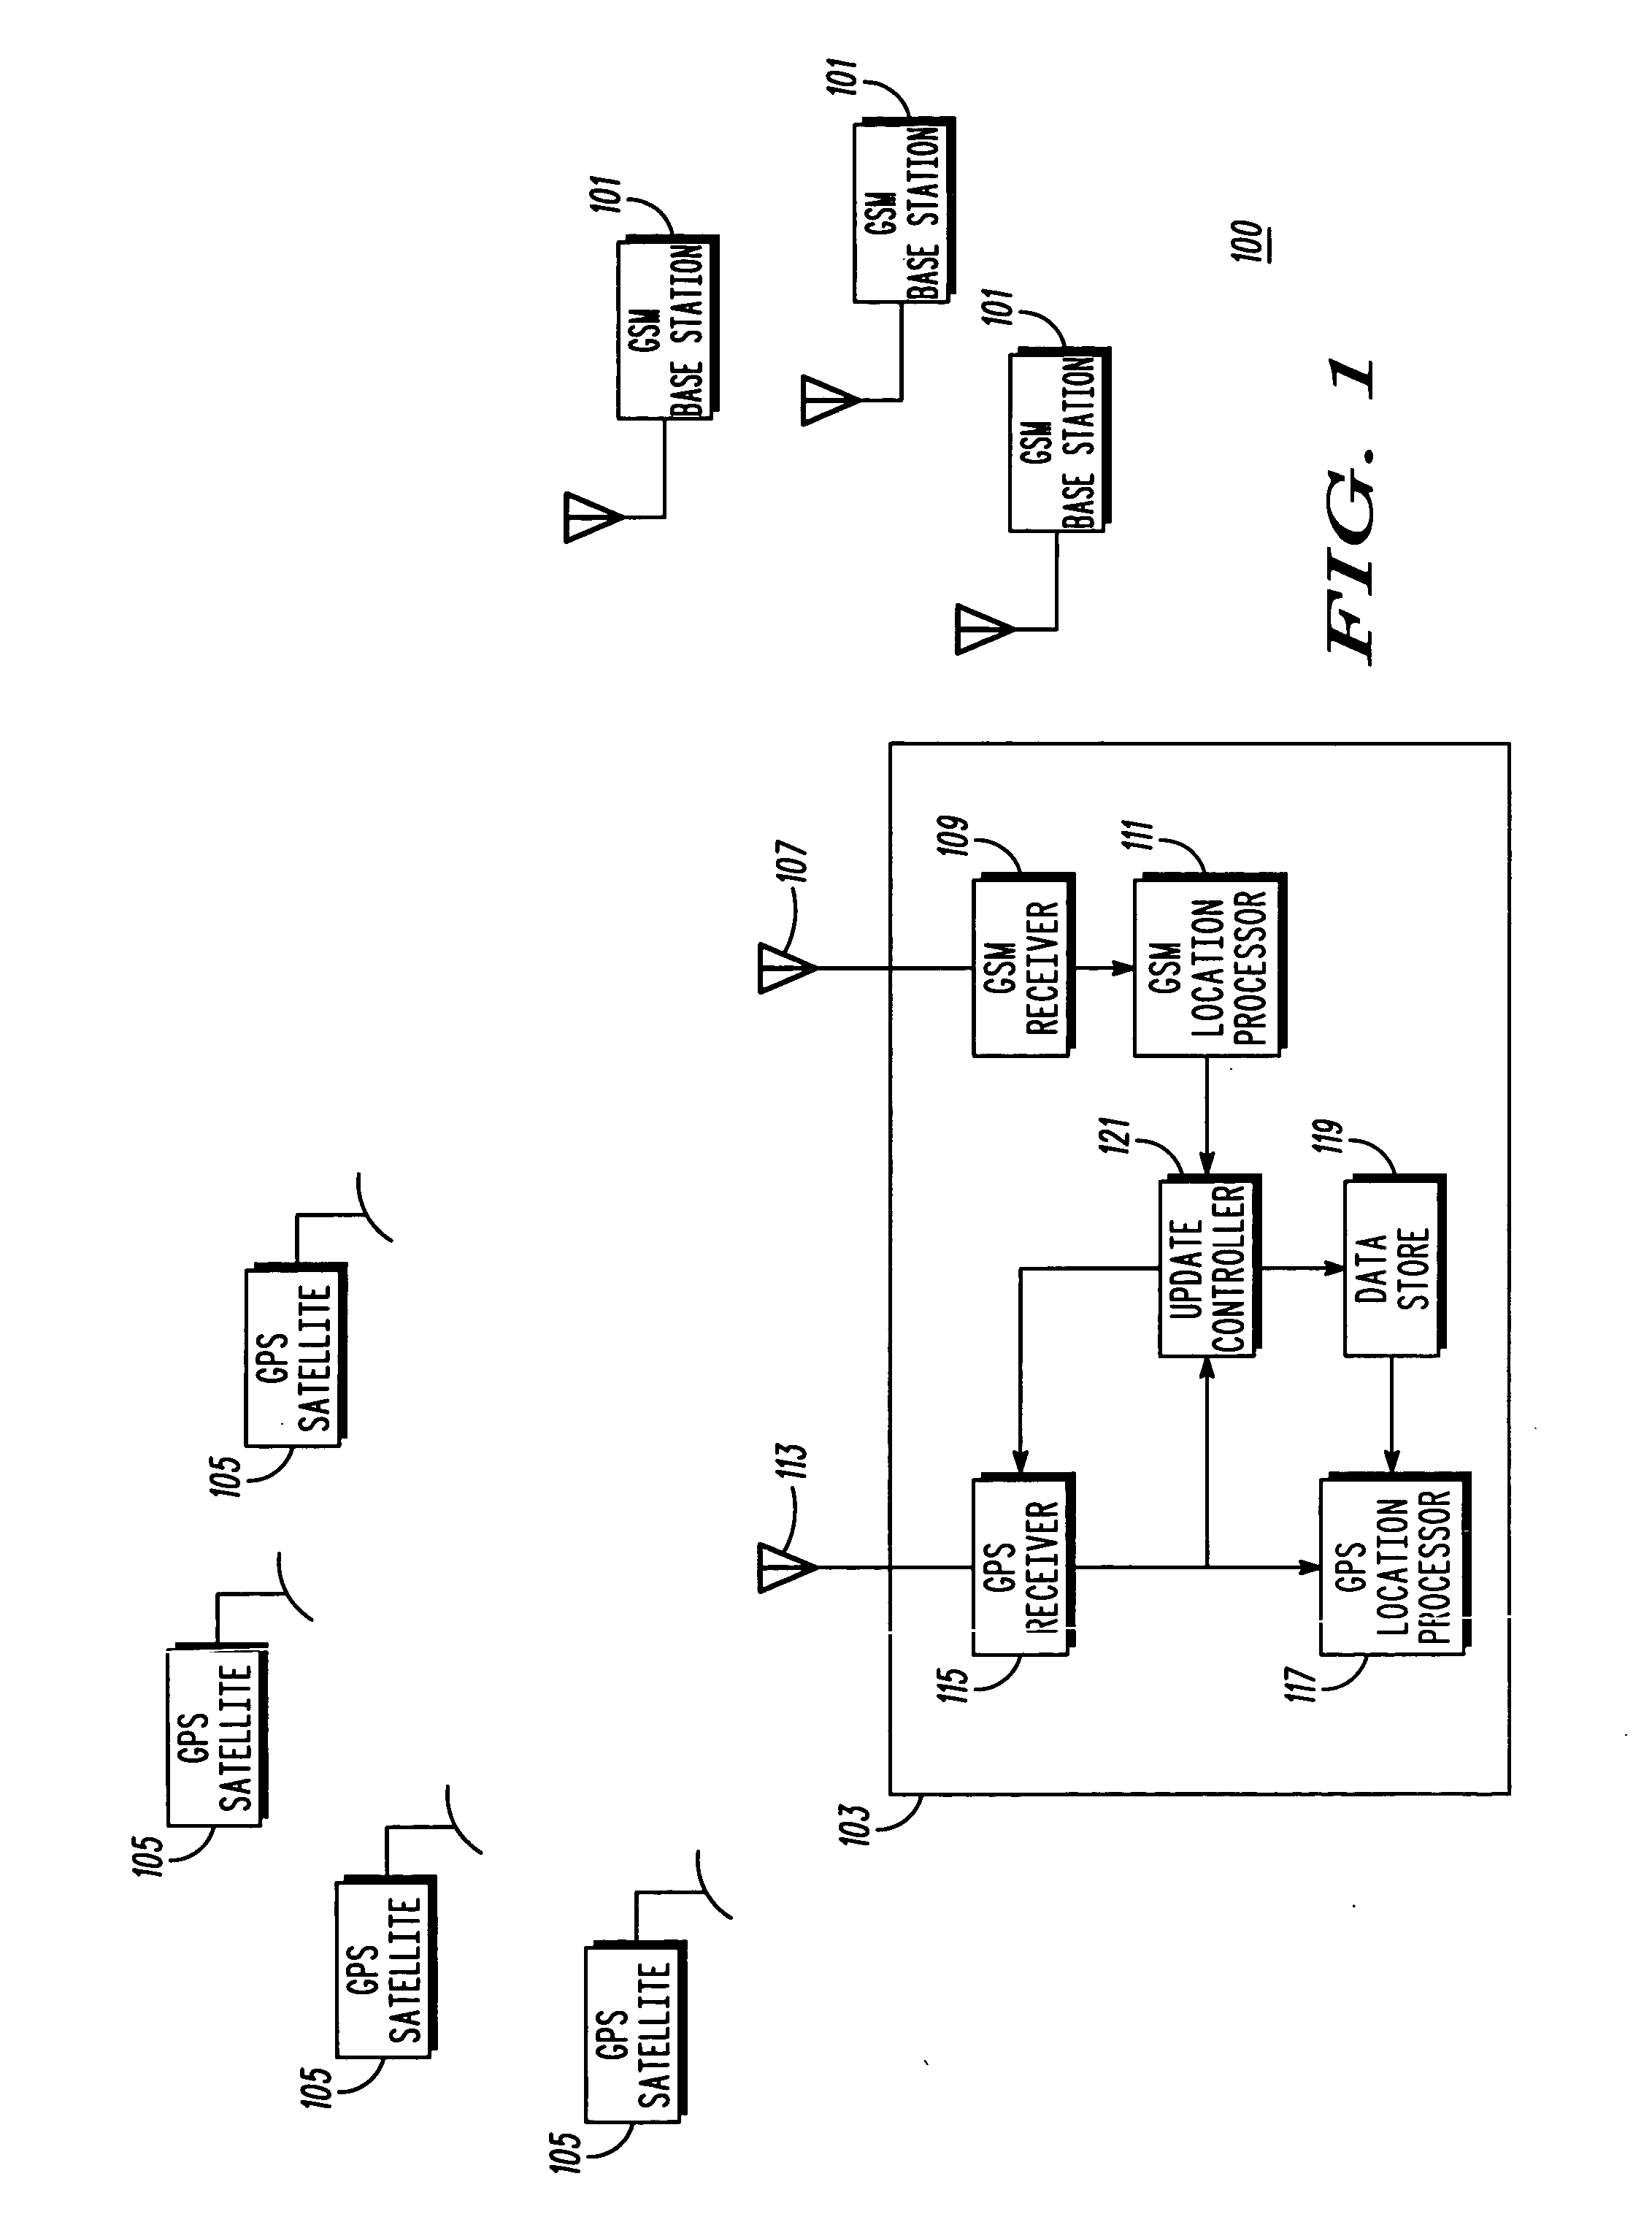 Subscriber unit, a cellular communication system and a method for determining a location therefor